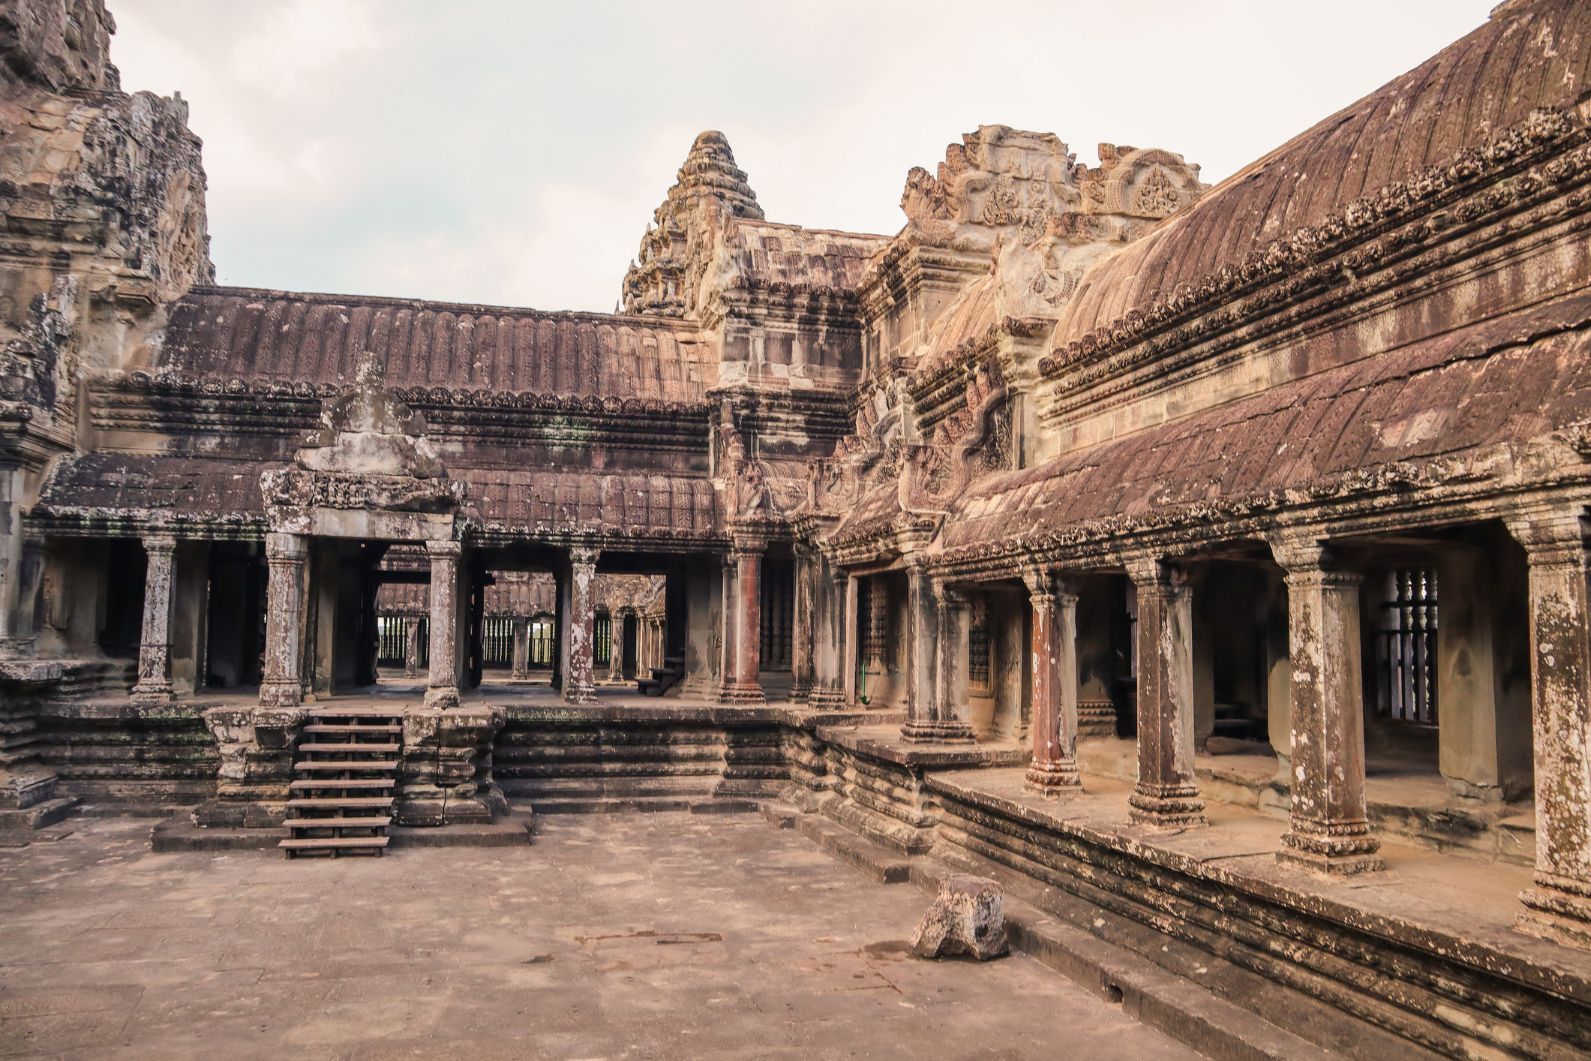 The inside of Angkor Wat temple, the largest religious monument ever built.